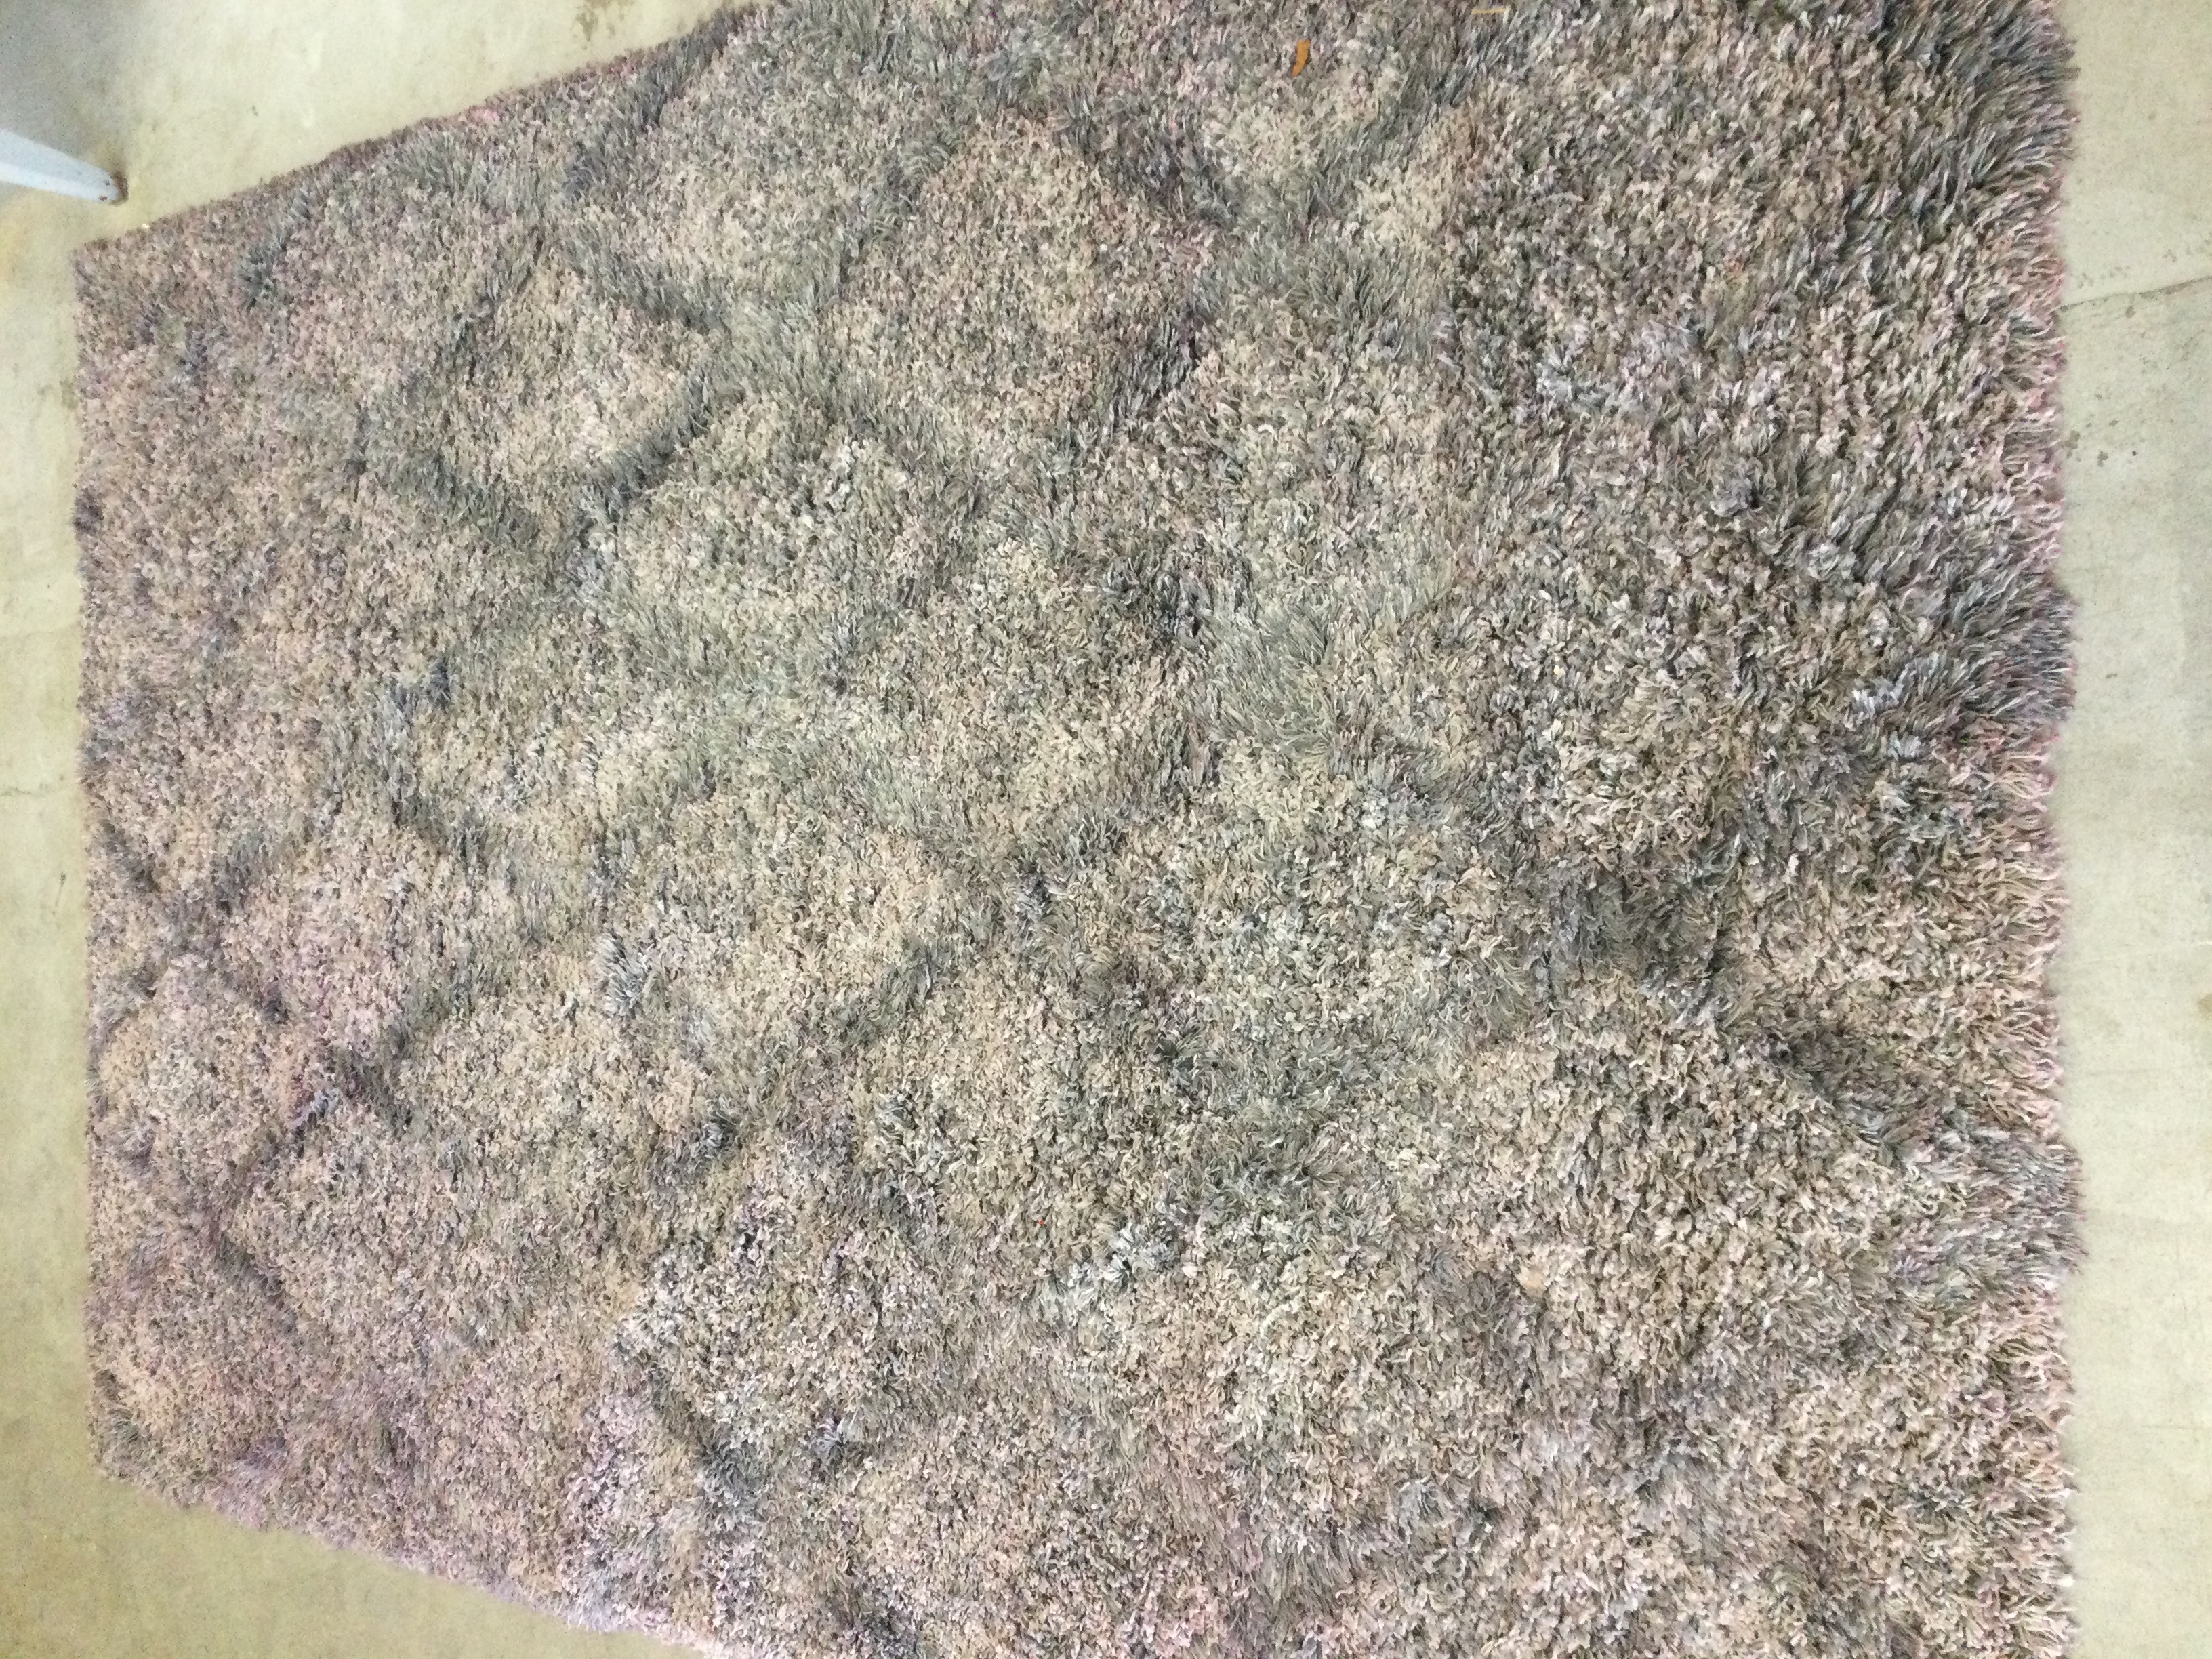 Car Wash Rug Before Cleaning